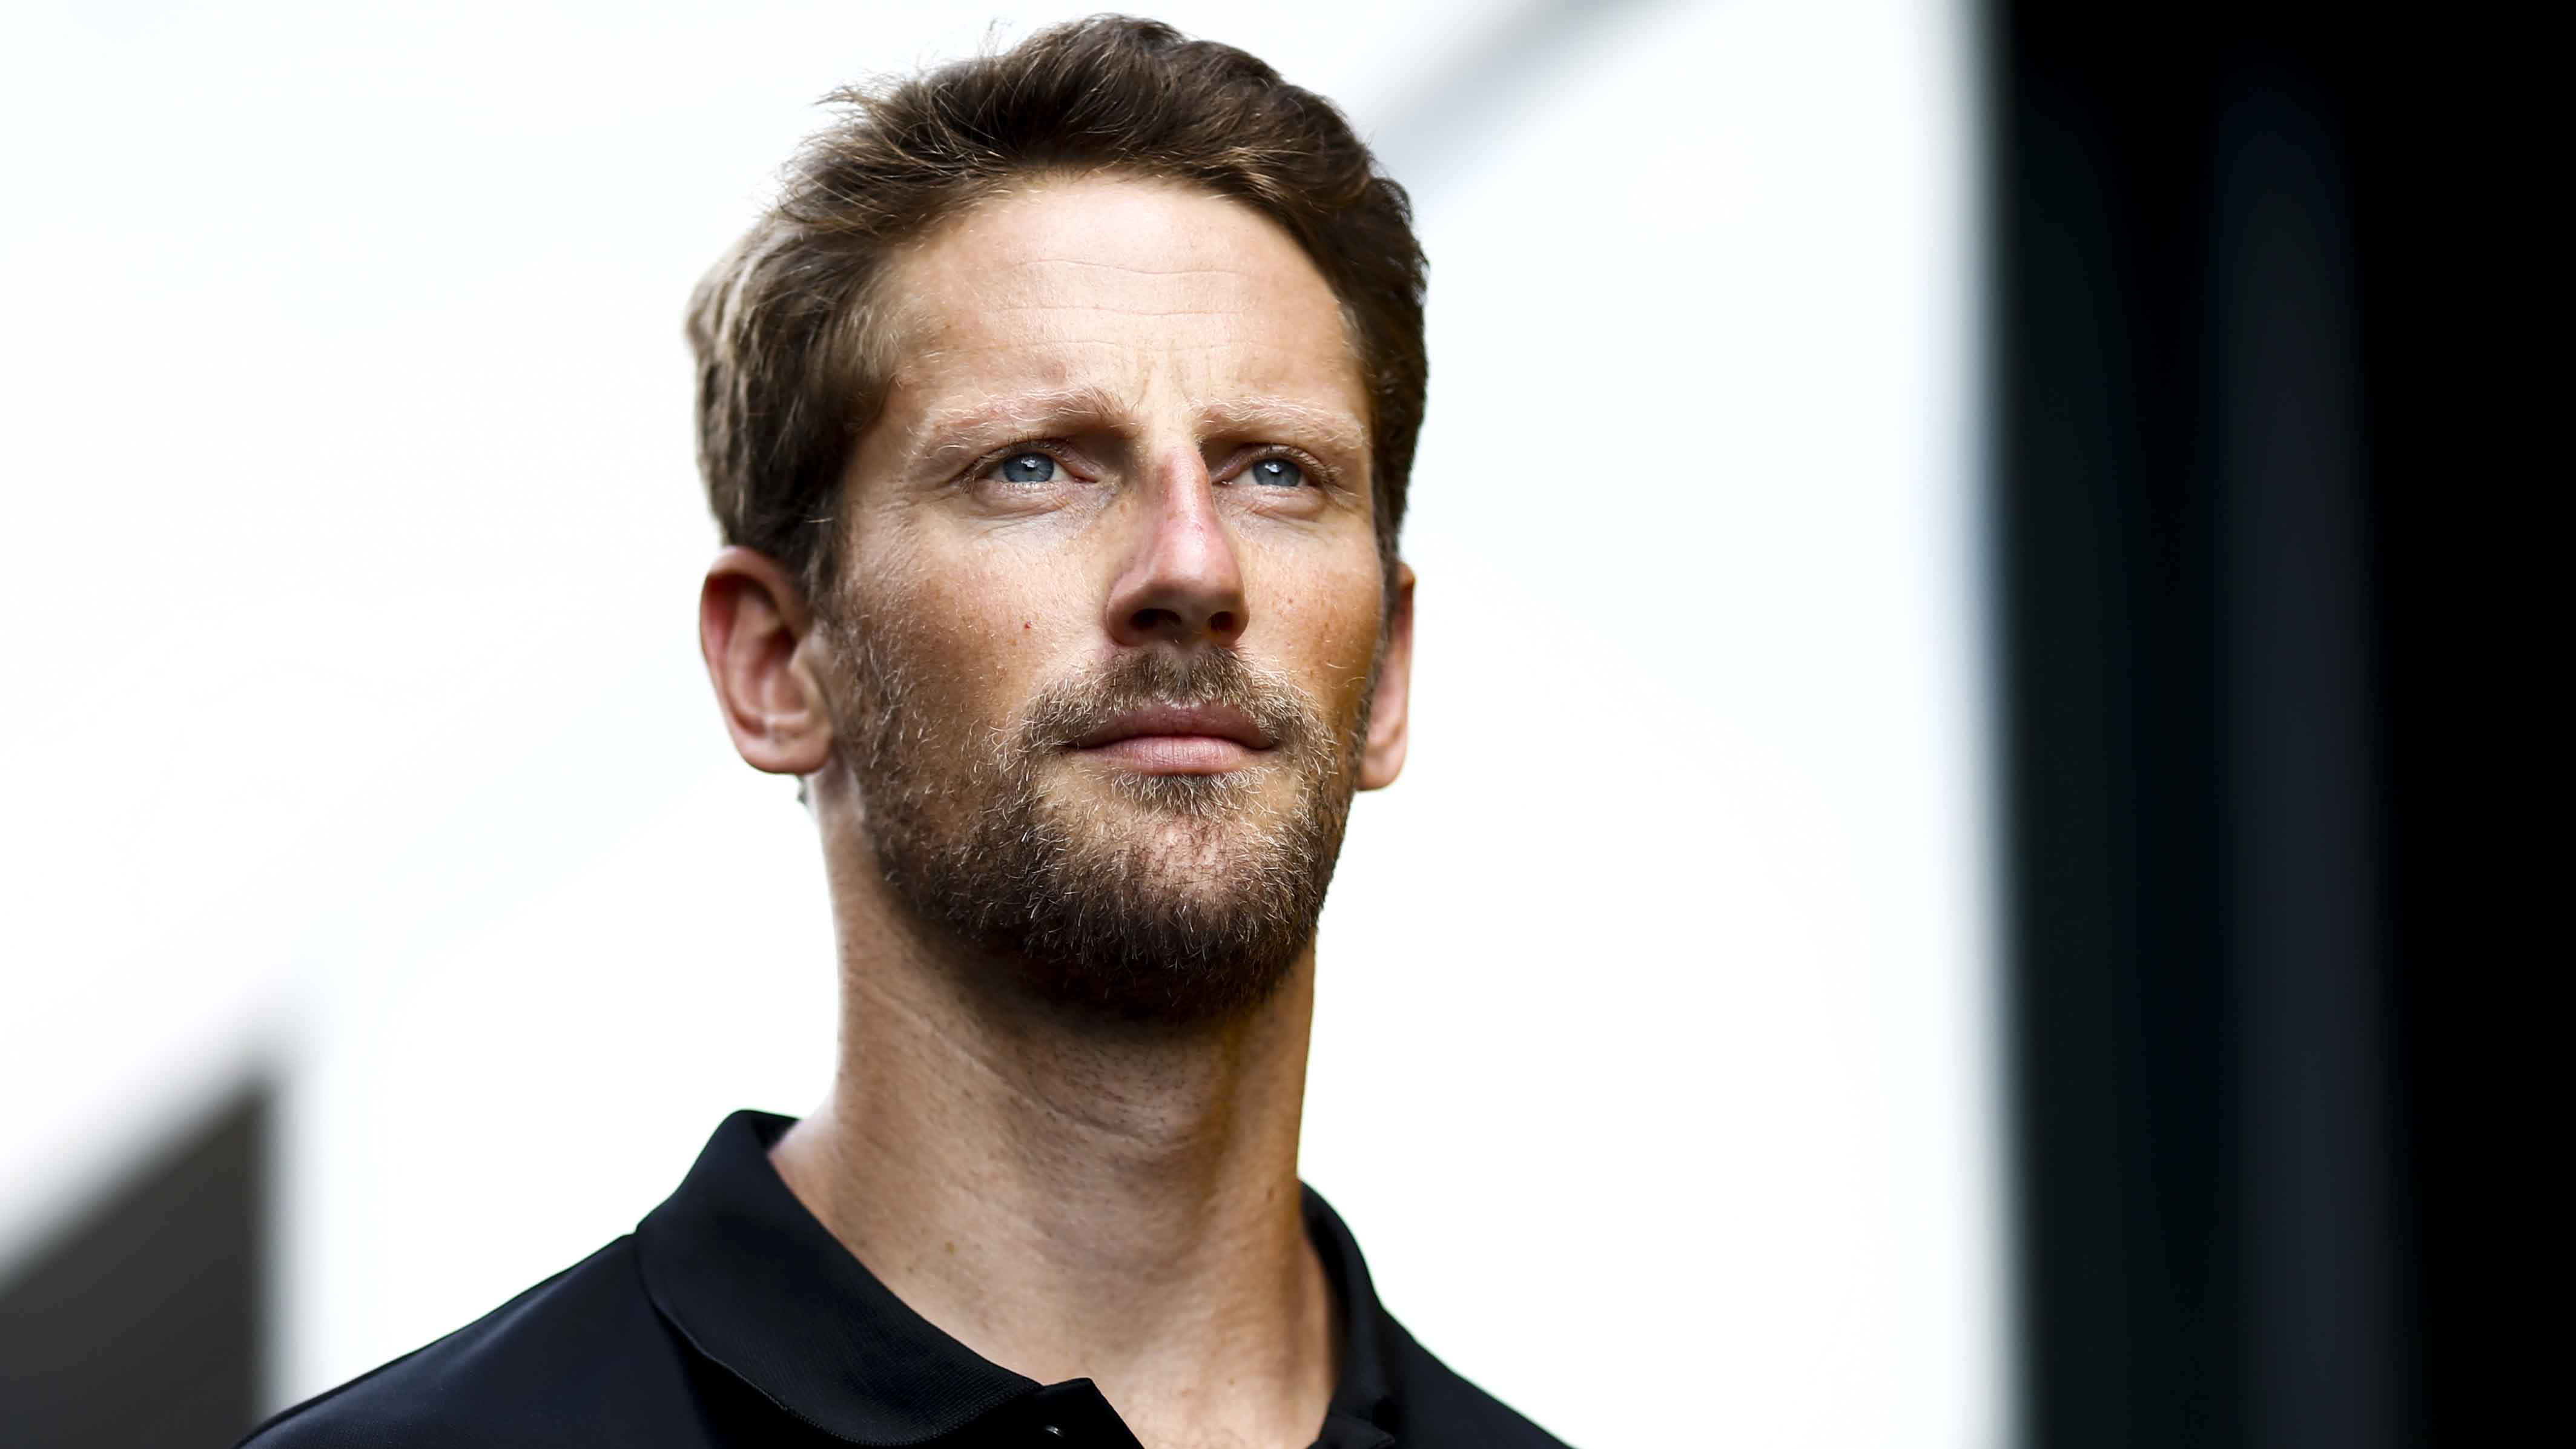 Romain Grosjean - Photo by Andy Hone / LAT Images pour HaasF1team